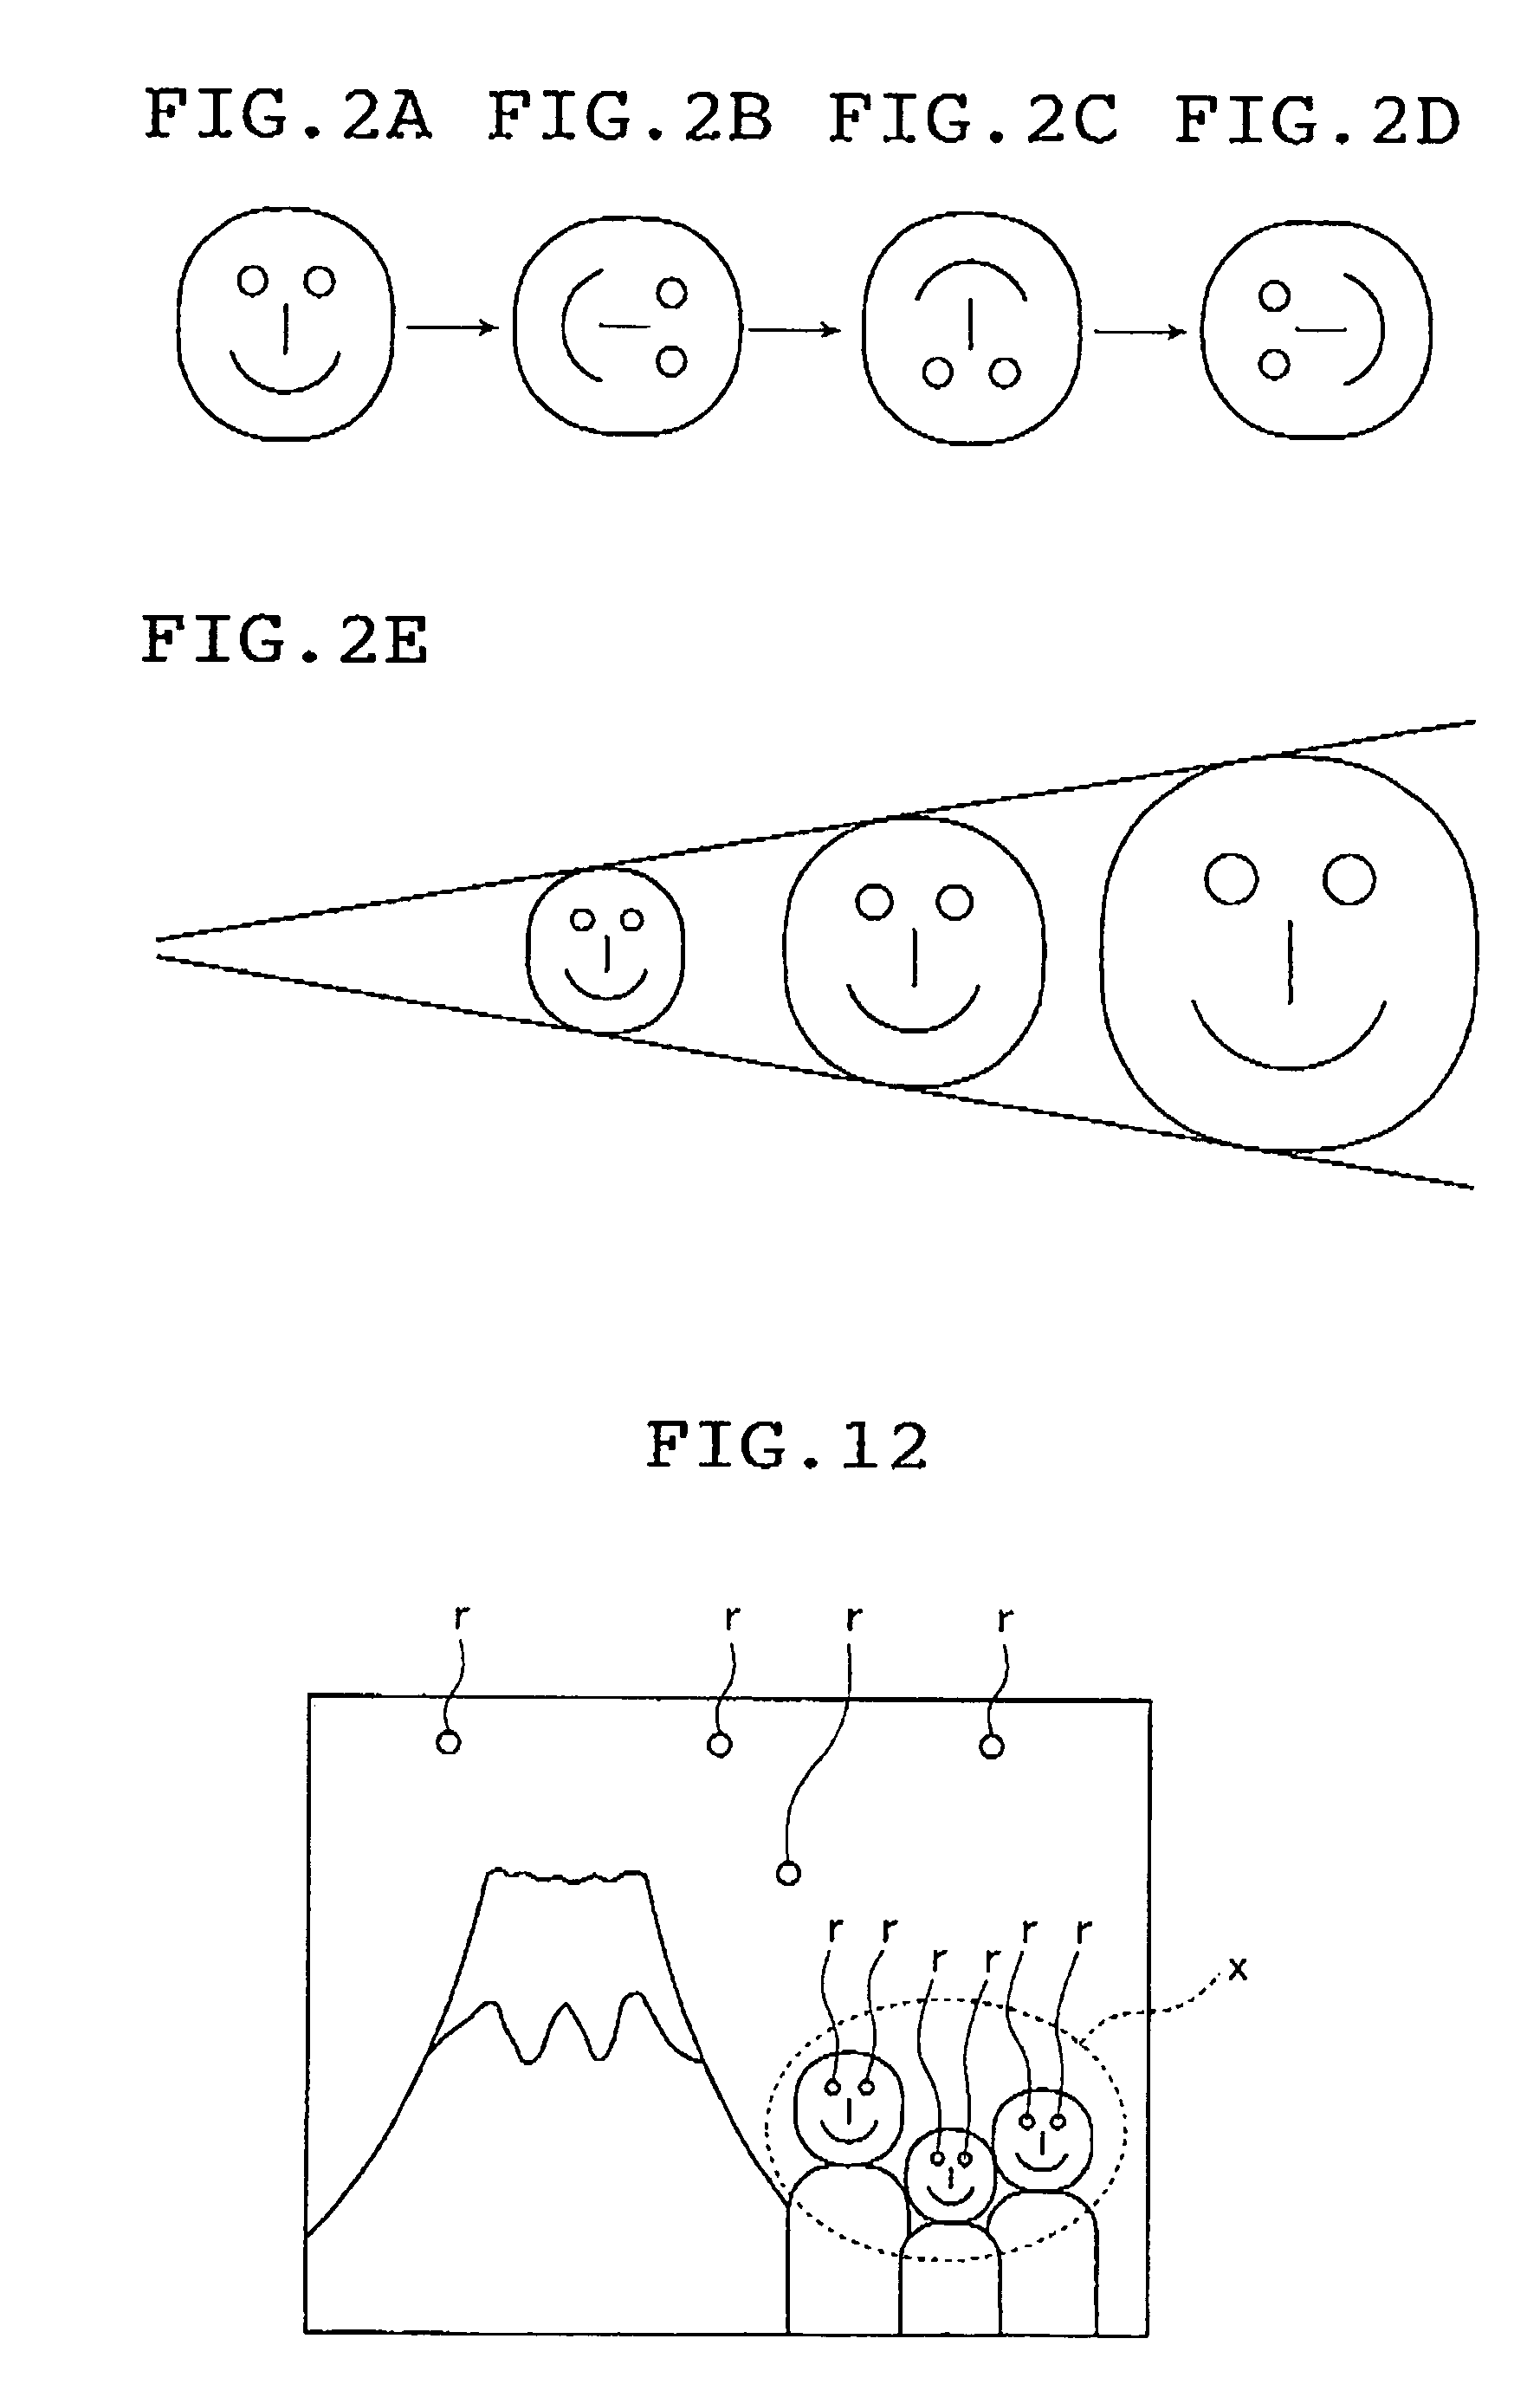 Particular-region detection method and apparatus, and program therefor